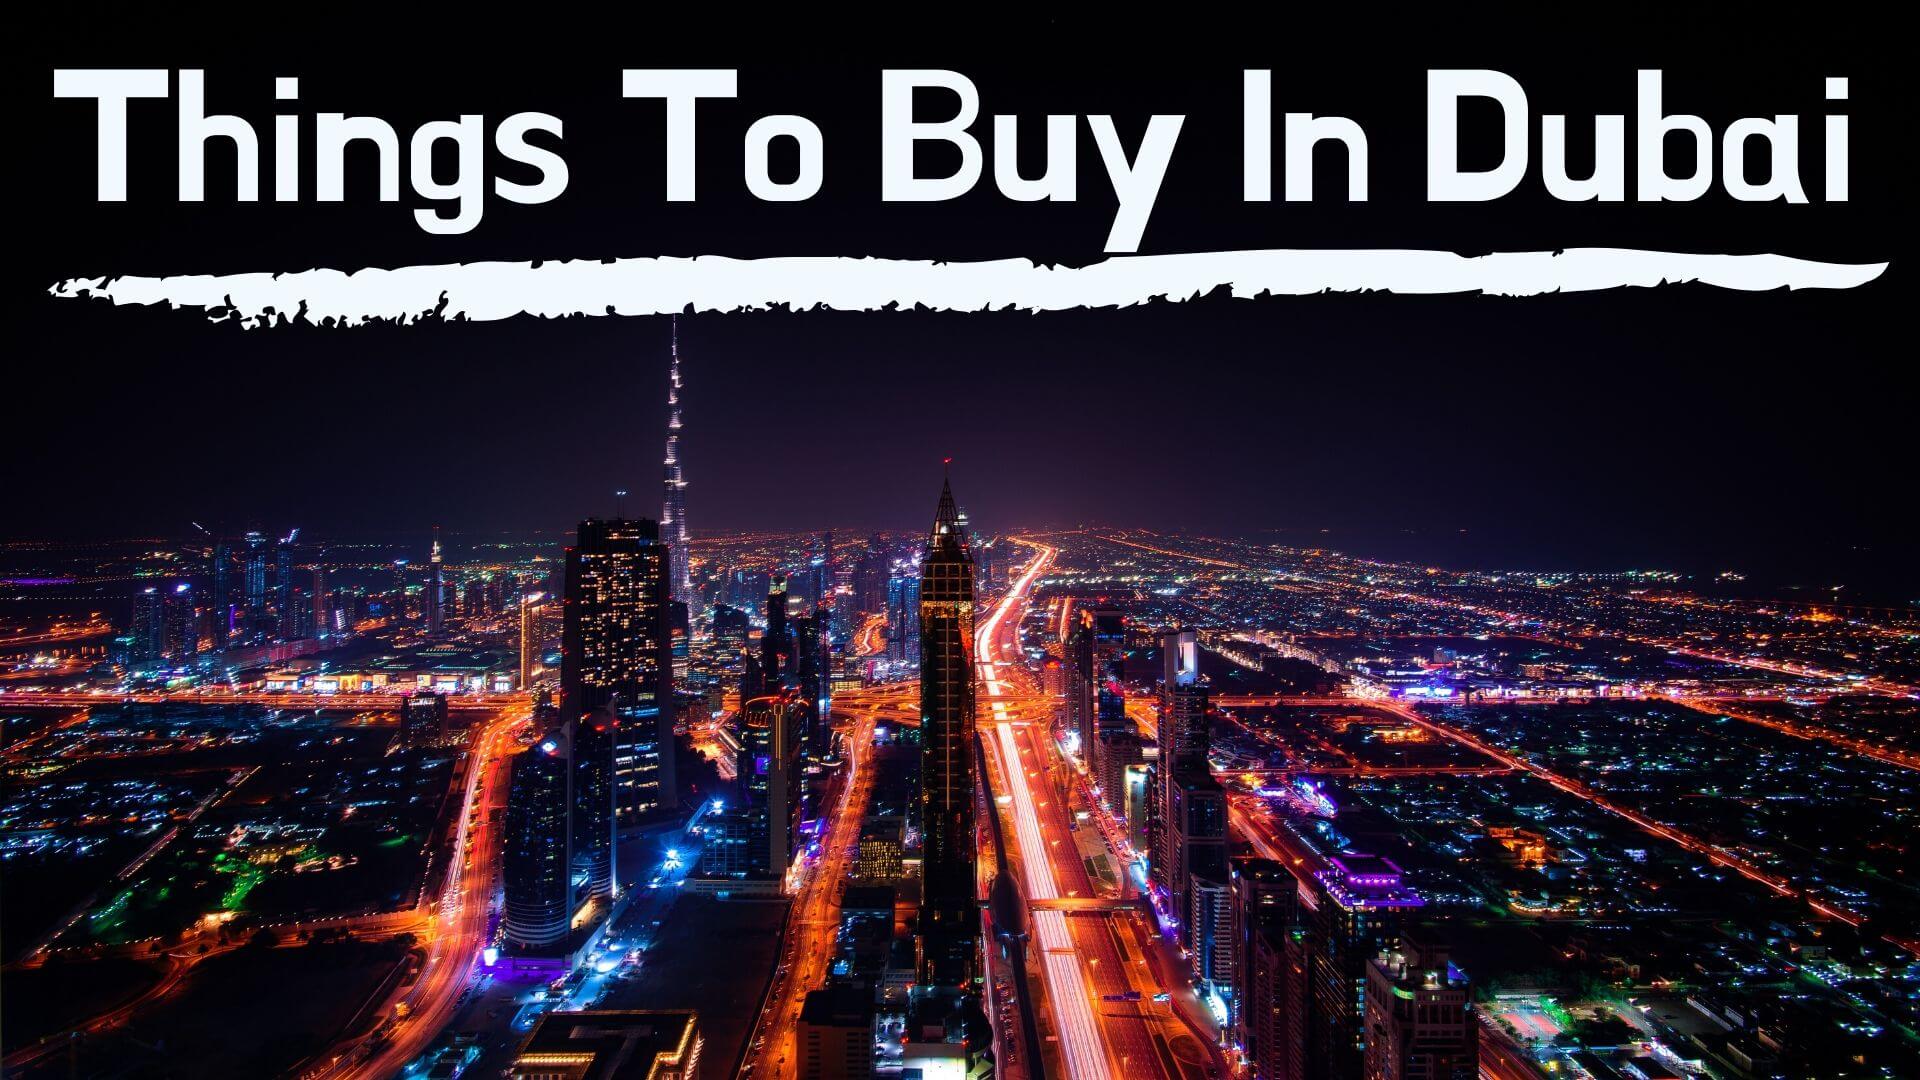 15 Best Things to Buy in Dubai for Ladies – Where & When to Buy